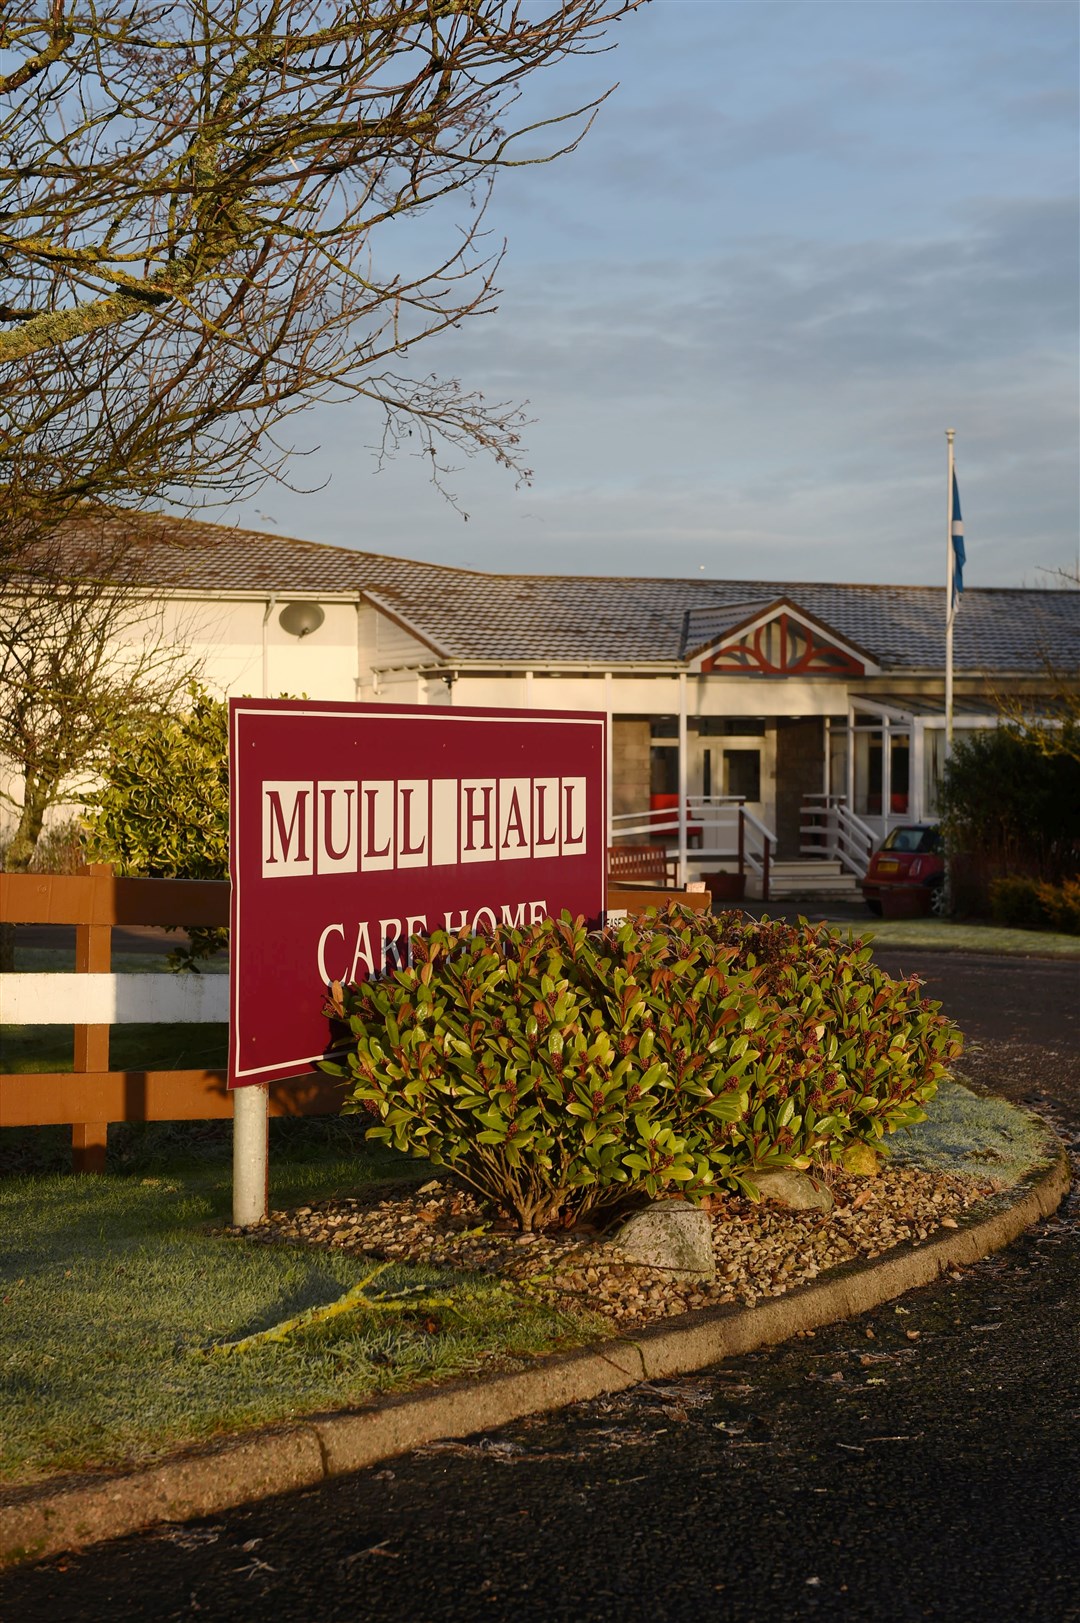 Mull Hall Care Home.